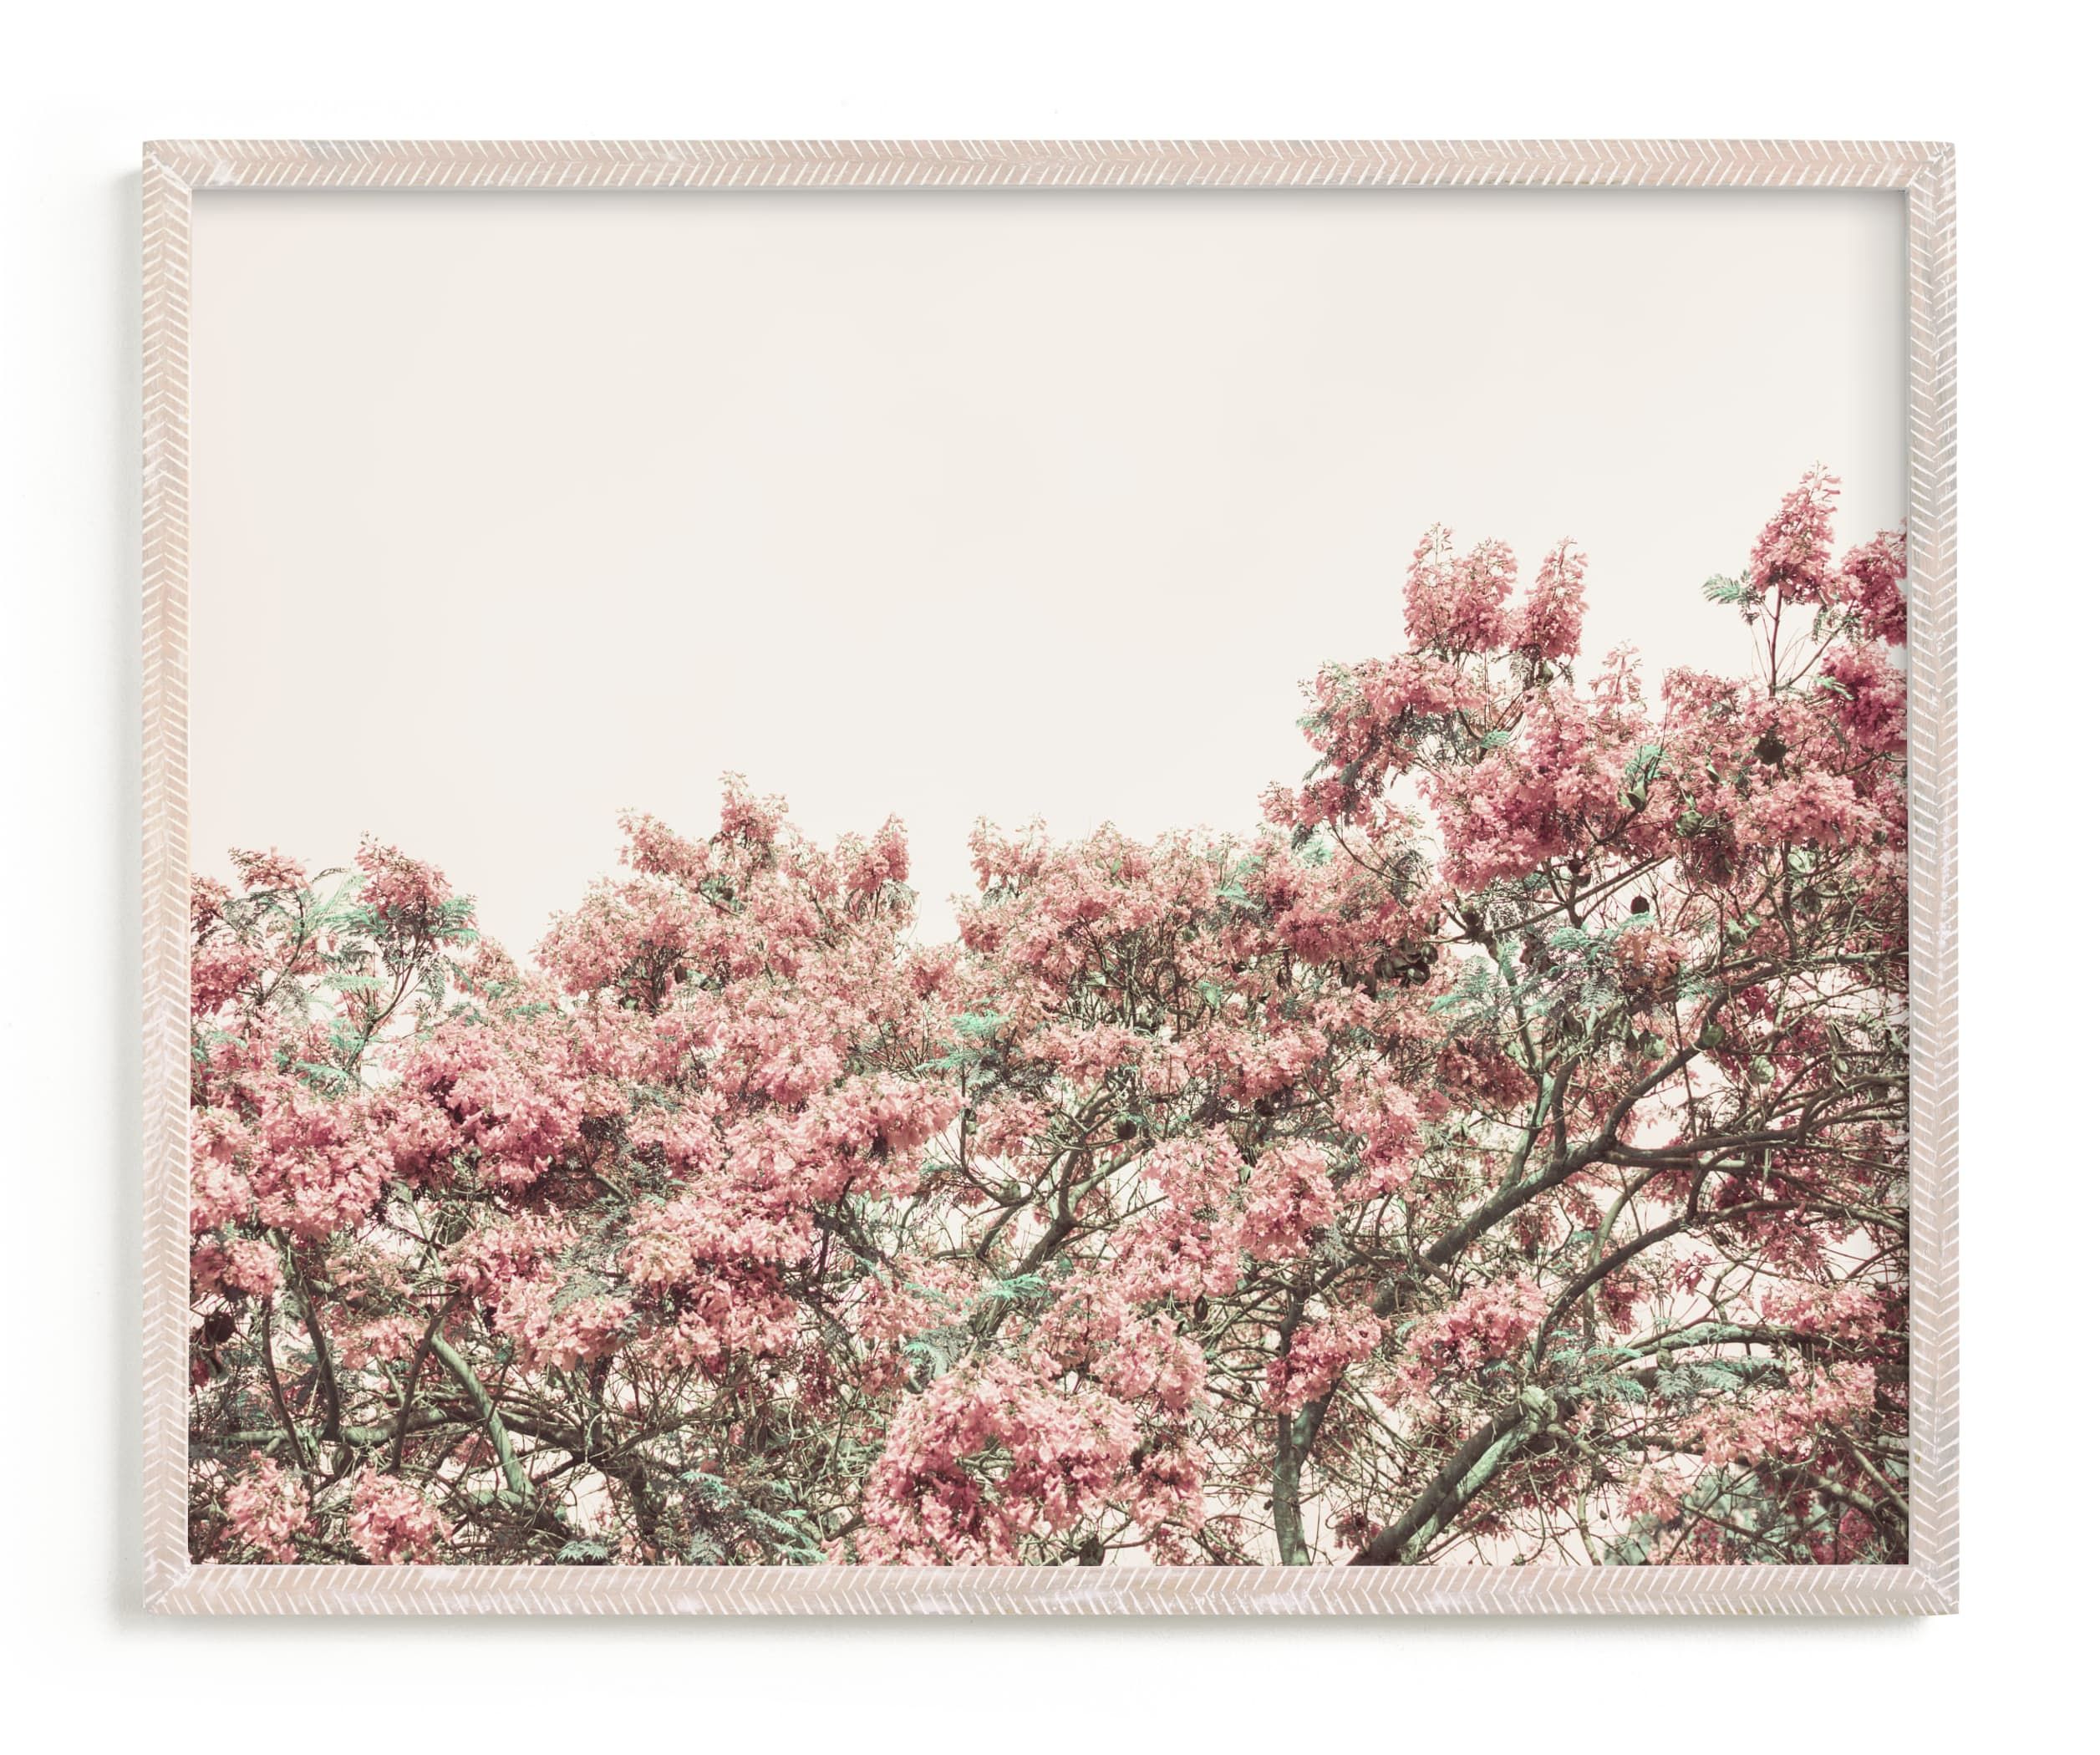 "Jacaranda in bloom" - Photography Limited Edition Art Print by Owl and Toad. | Minted